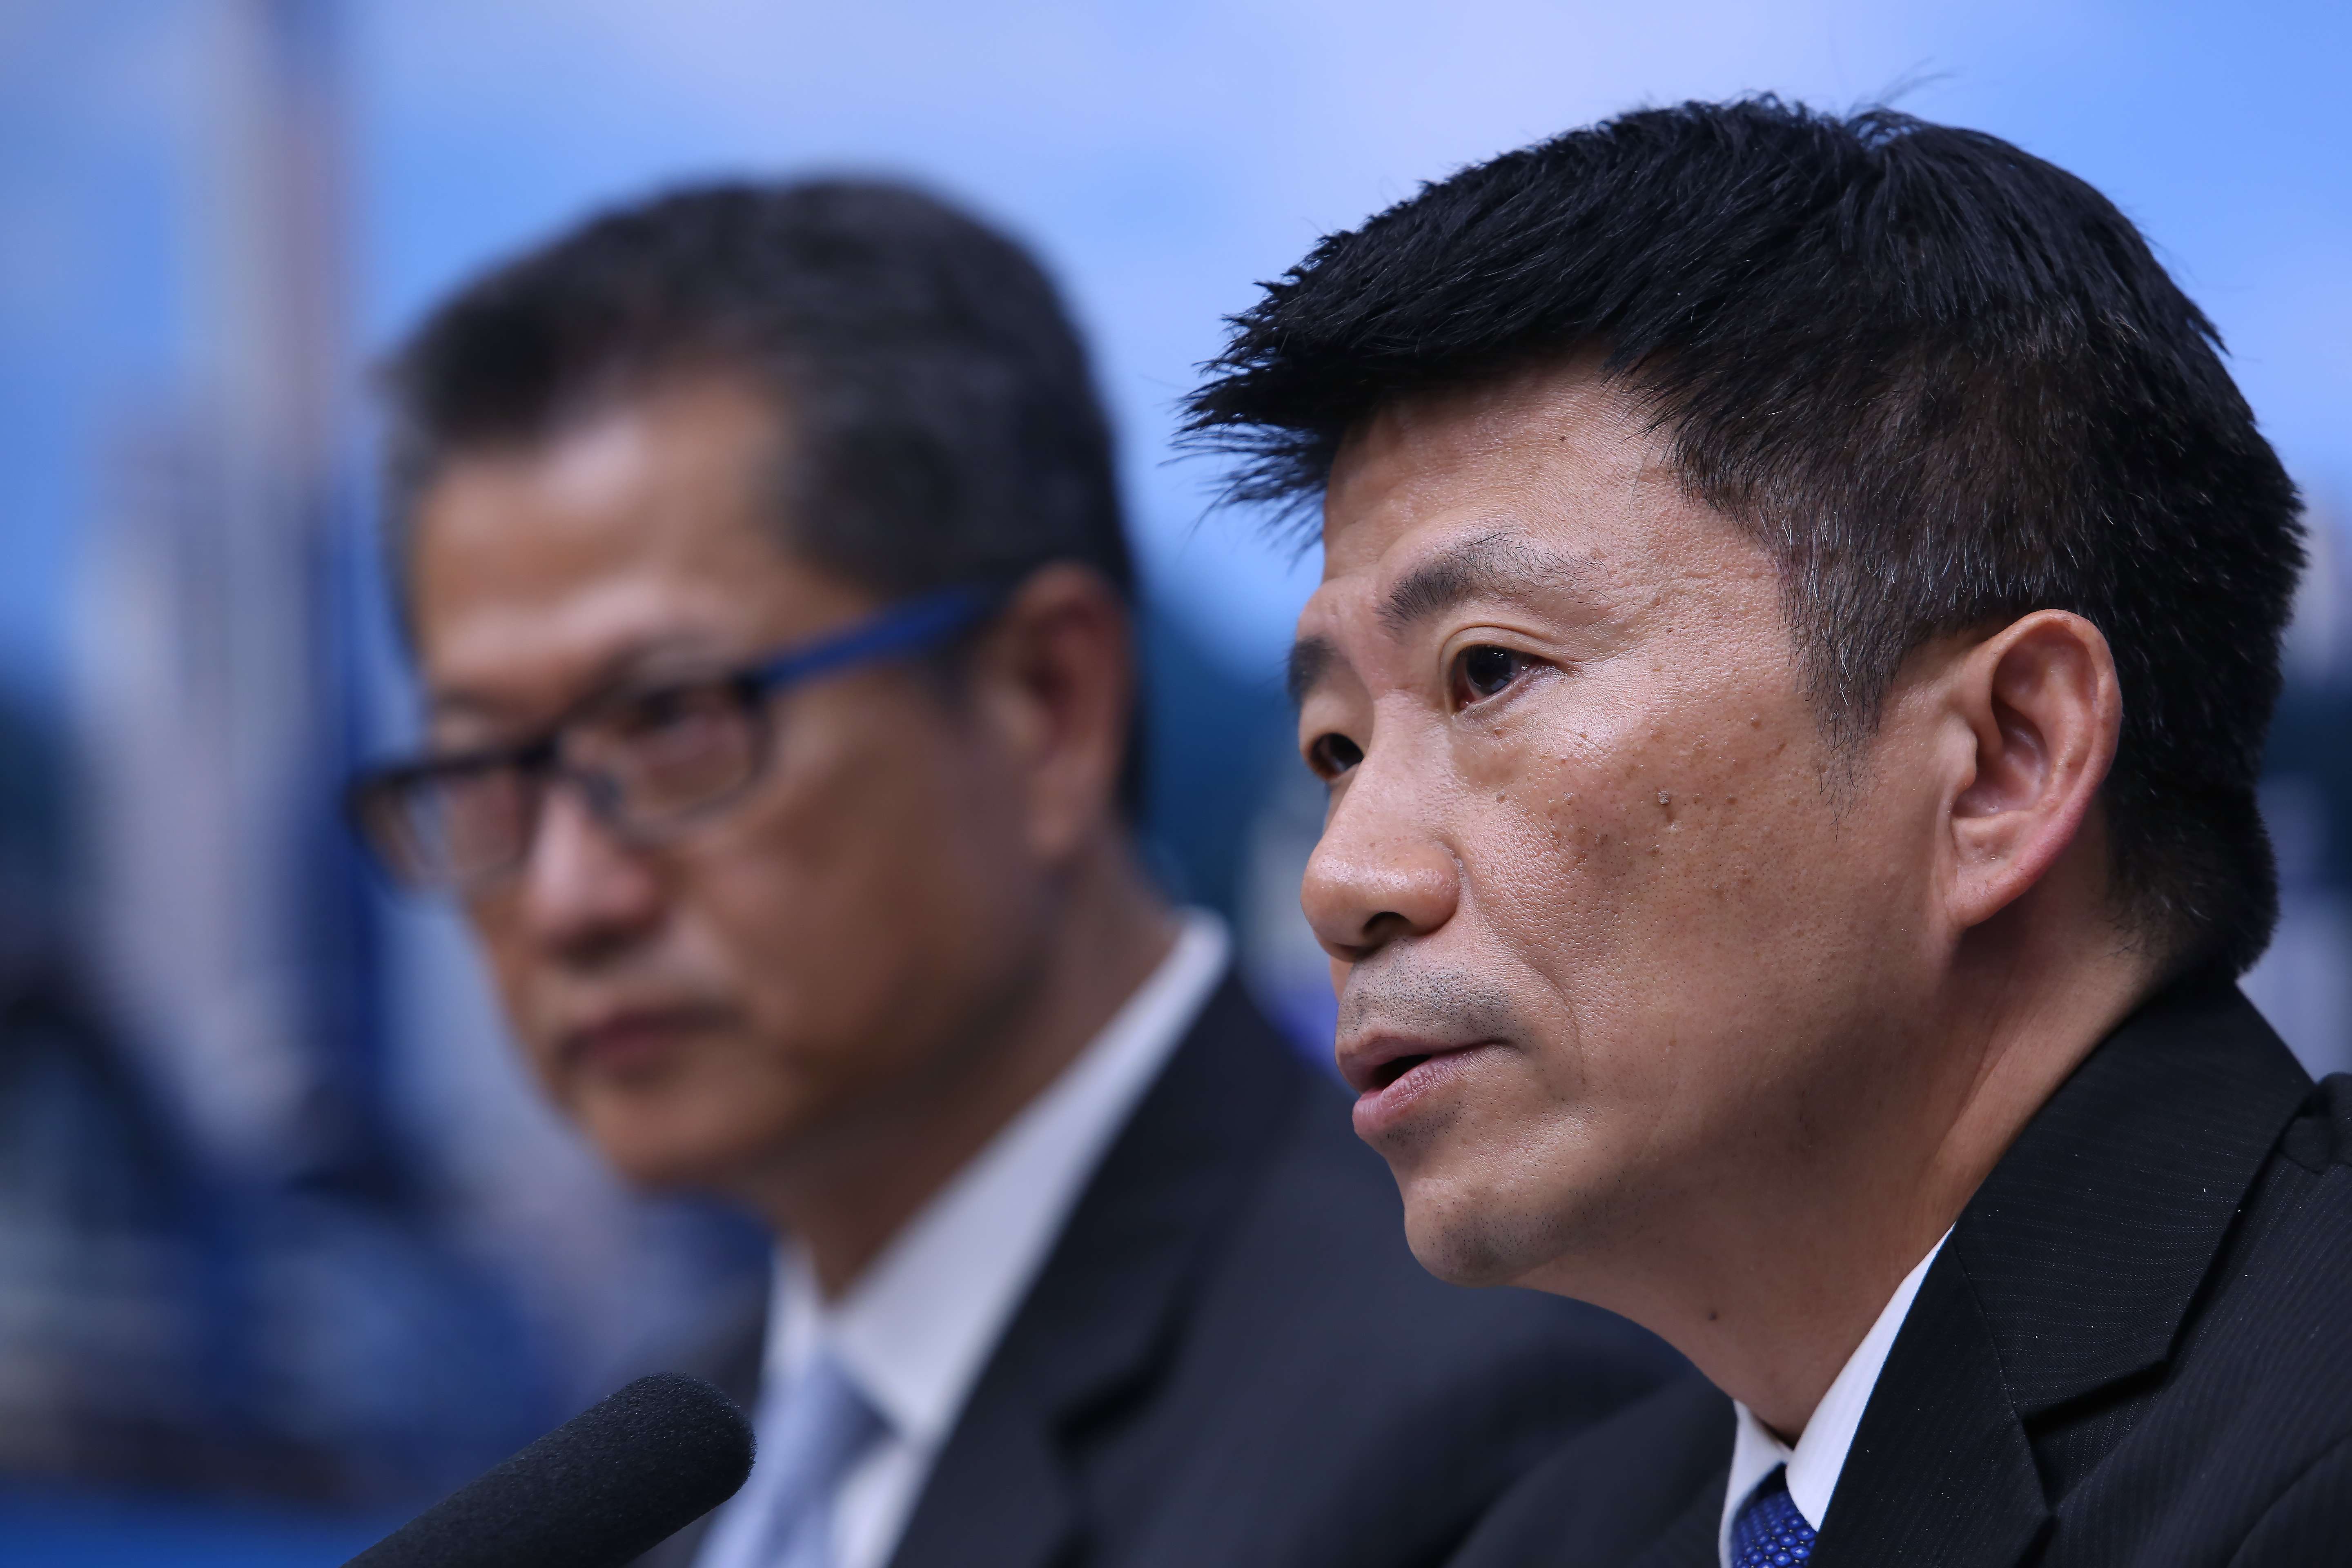 Director of Water Supplies Enoch Lam Tin-sing at a press conference on water quality last summer. Photo: Sam Tsang